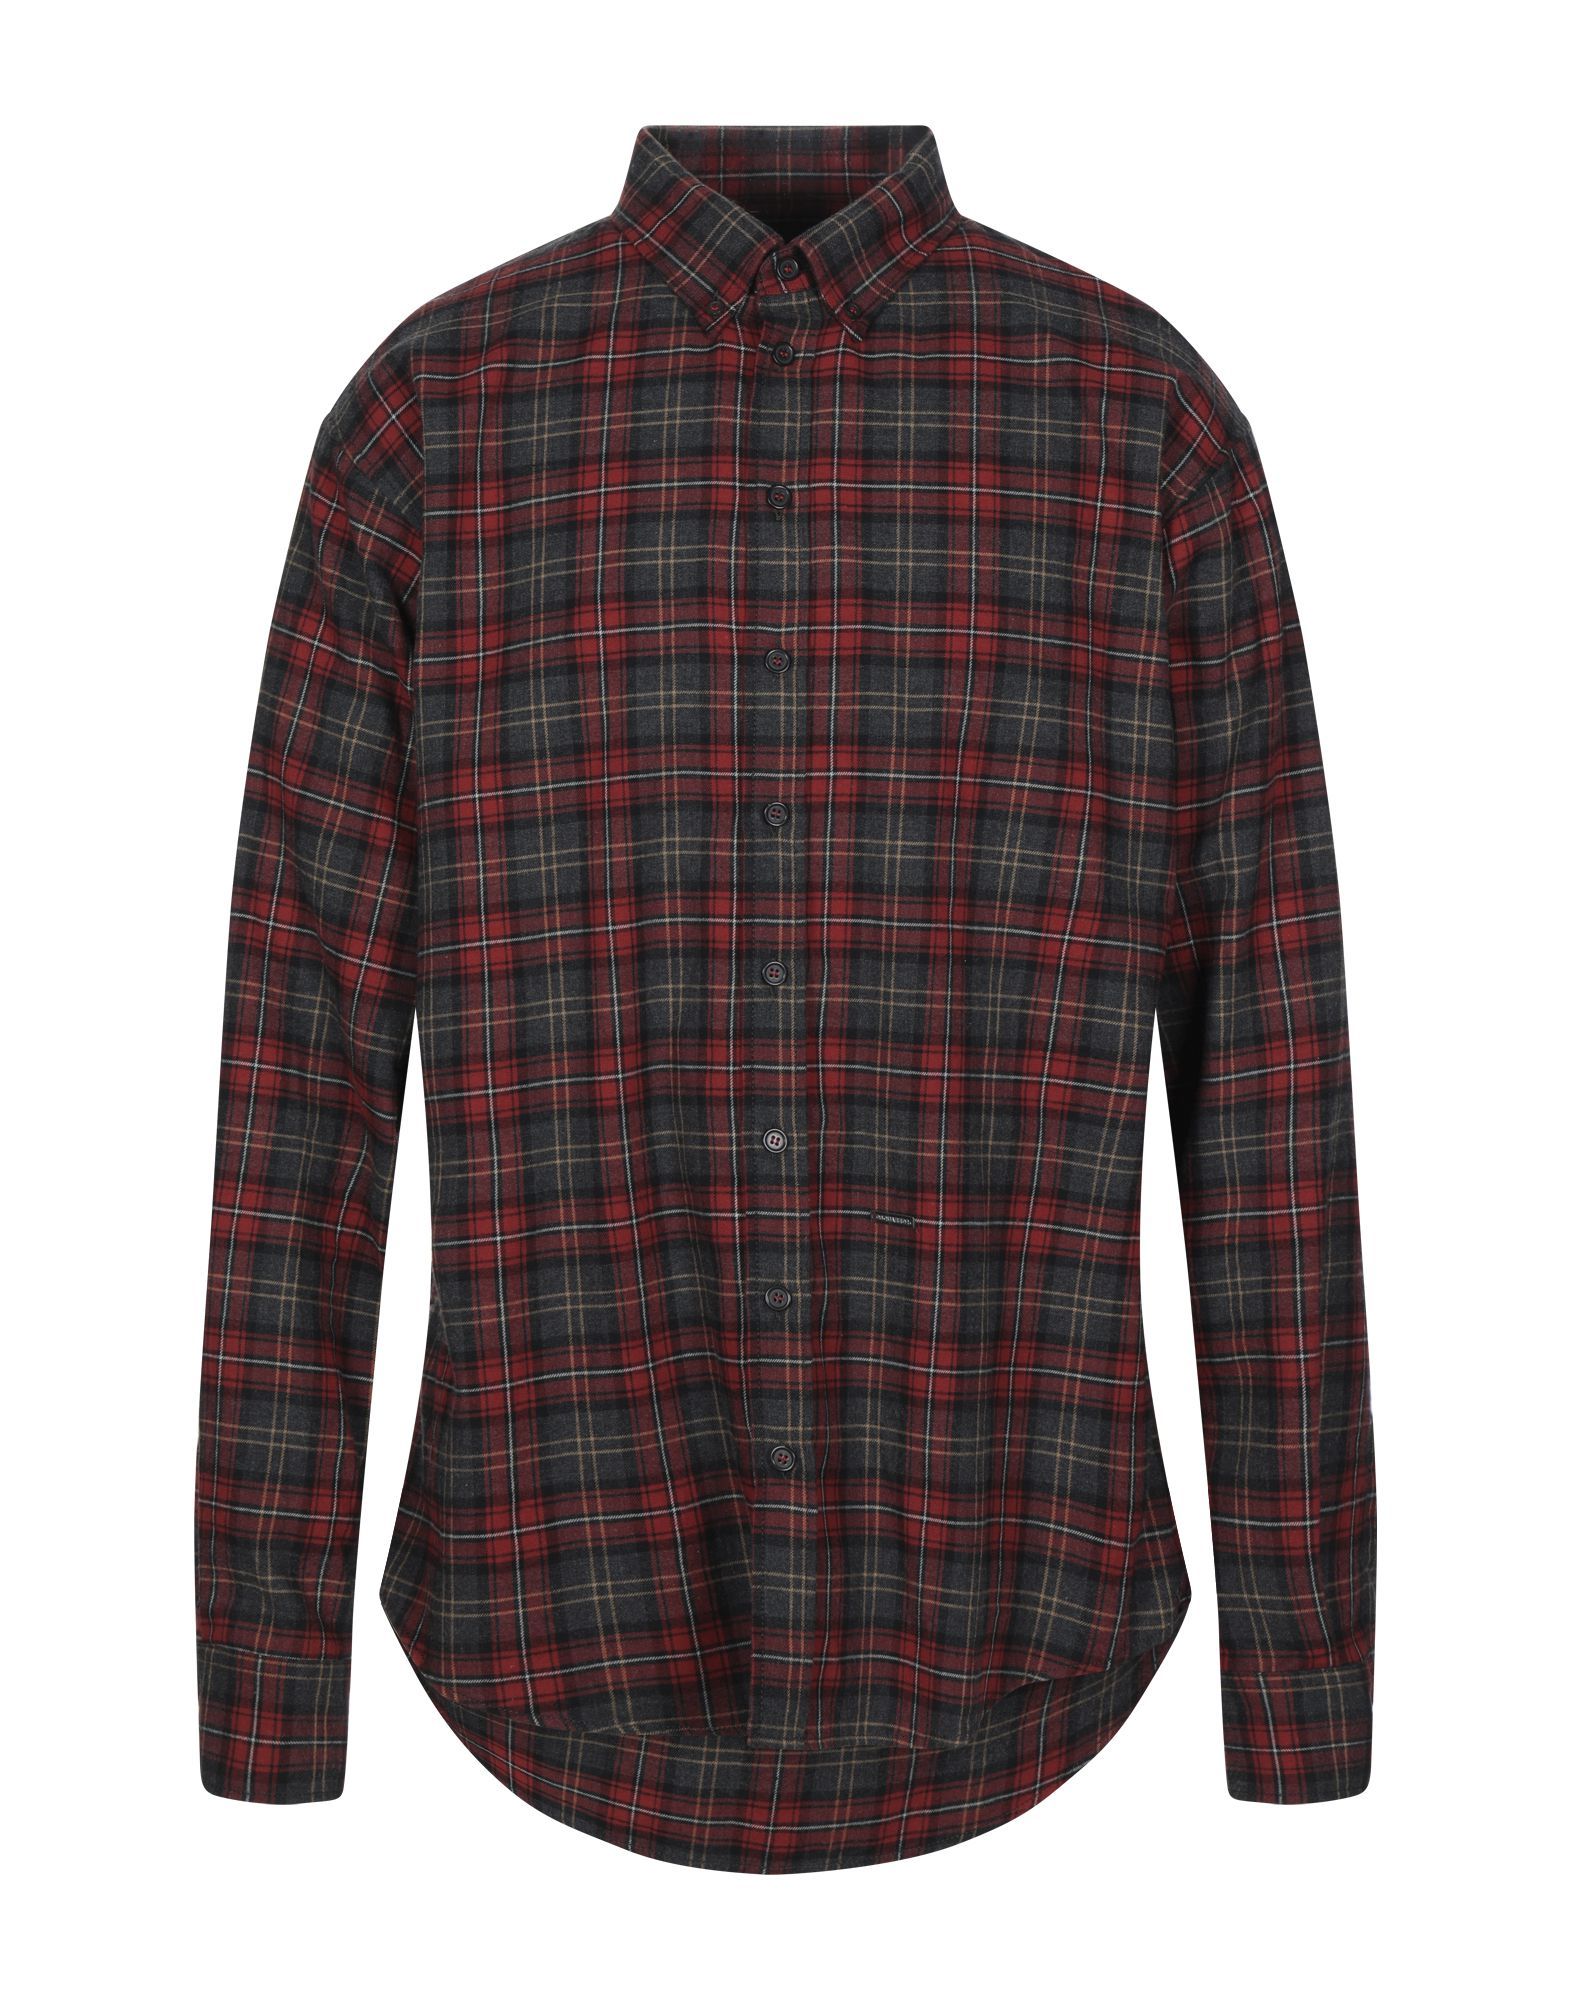 flannel, logo, tartan plaid, front closure, button closing, long sleeves, buttoned cuffs, button-down collar, no pockets, contains non-textile parts of animal origin